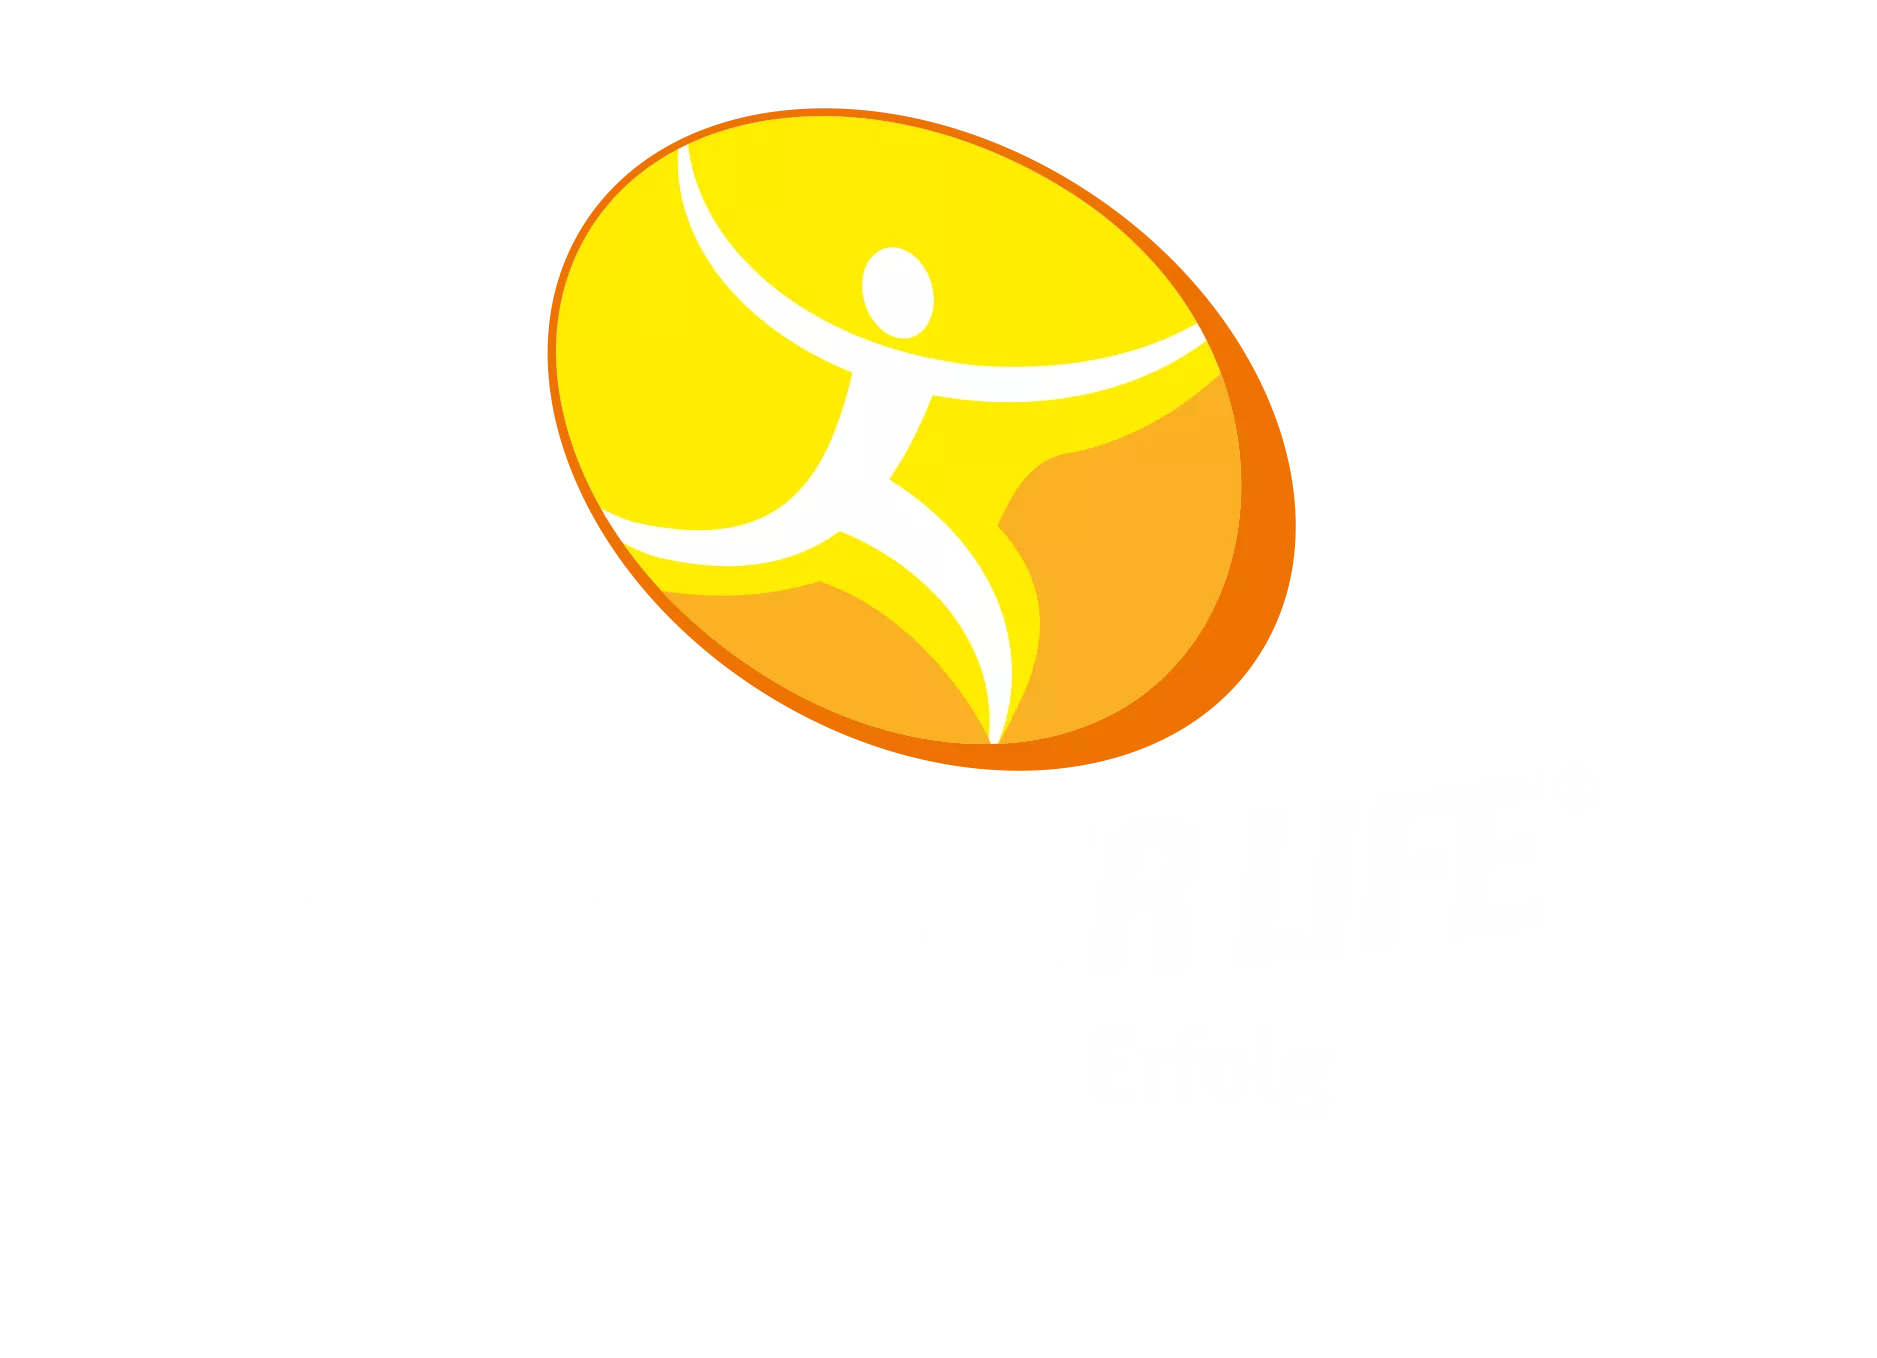 Move Your Life